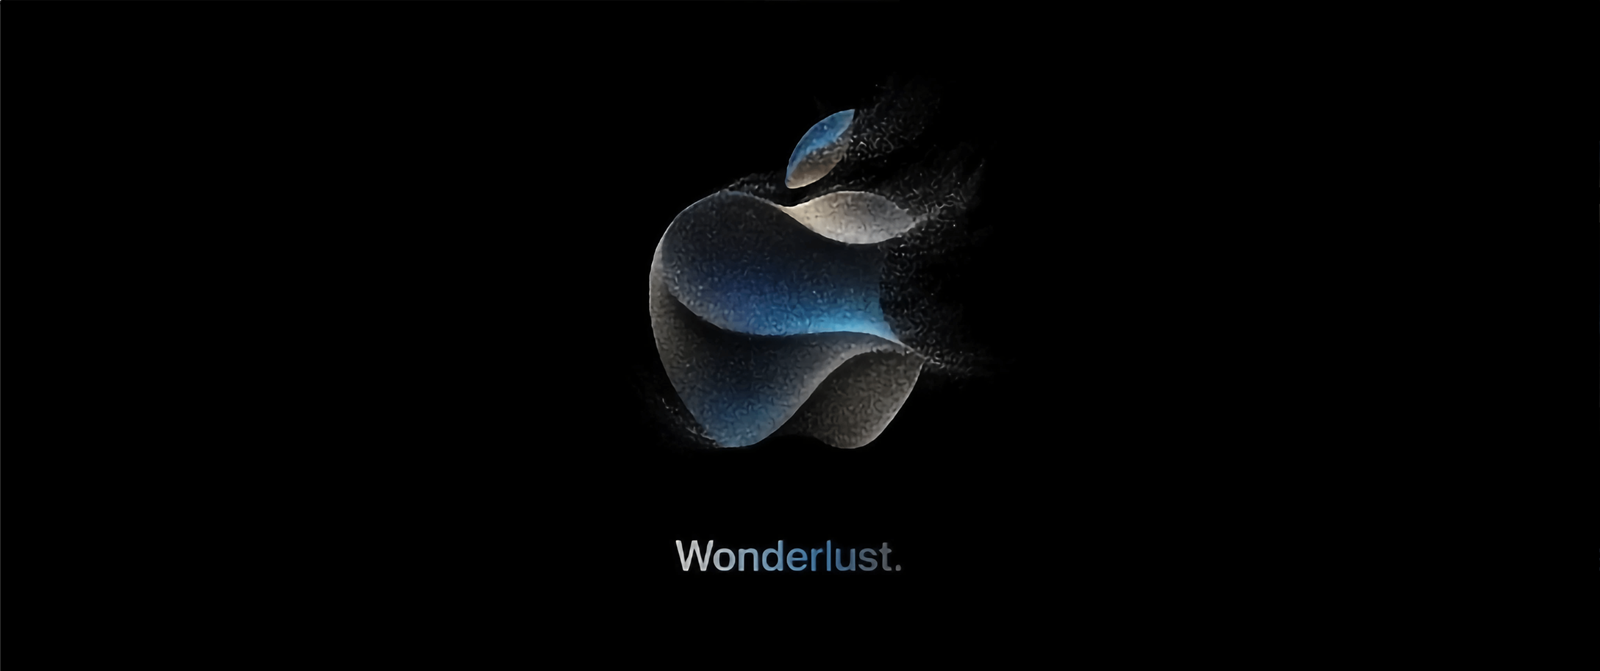 iPhone 15 Launch: Apple’s Wonderlust Event: What To Expect